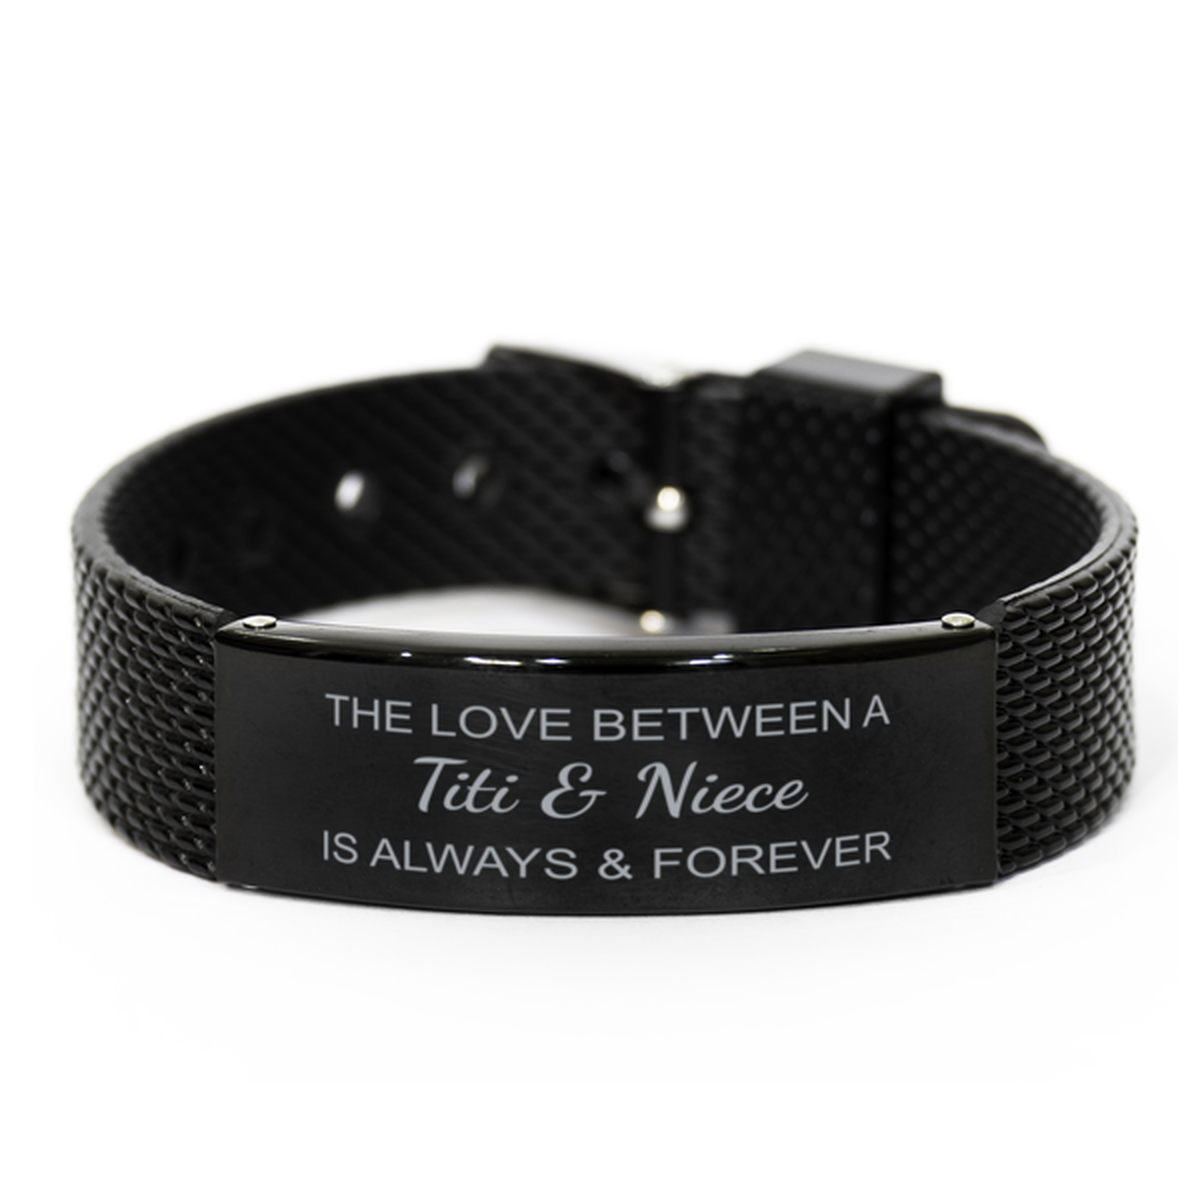 The Love Between a Titi and Niece is Always and Forever Bracelet, Titi Niece Bracelet, Black Stainless Steel Leather Bracelet, Christmas.